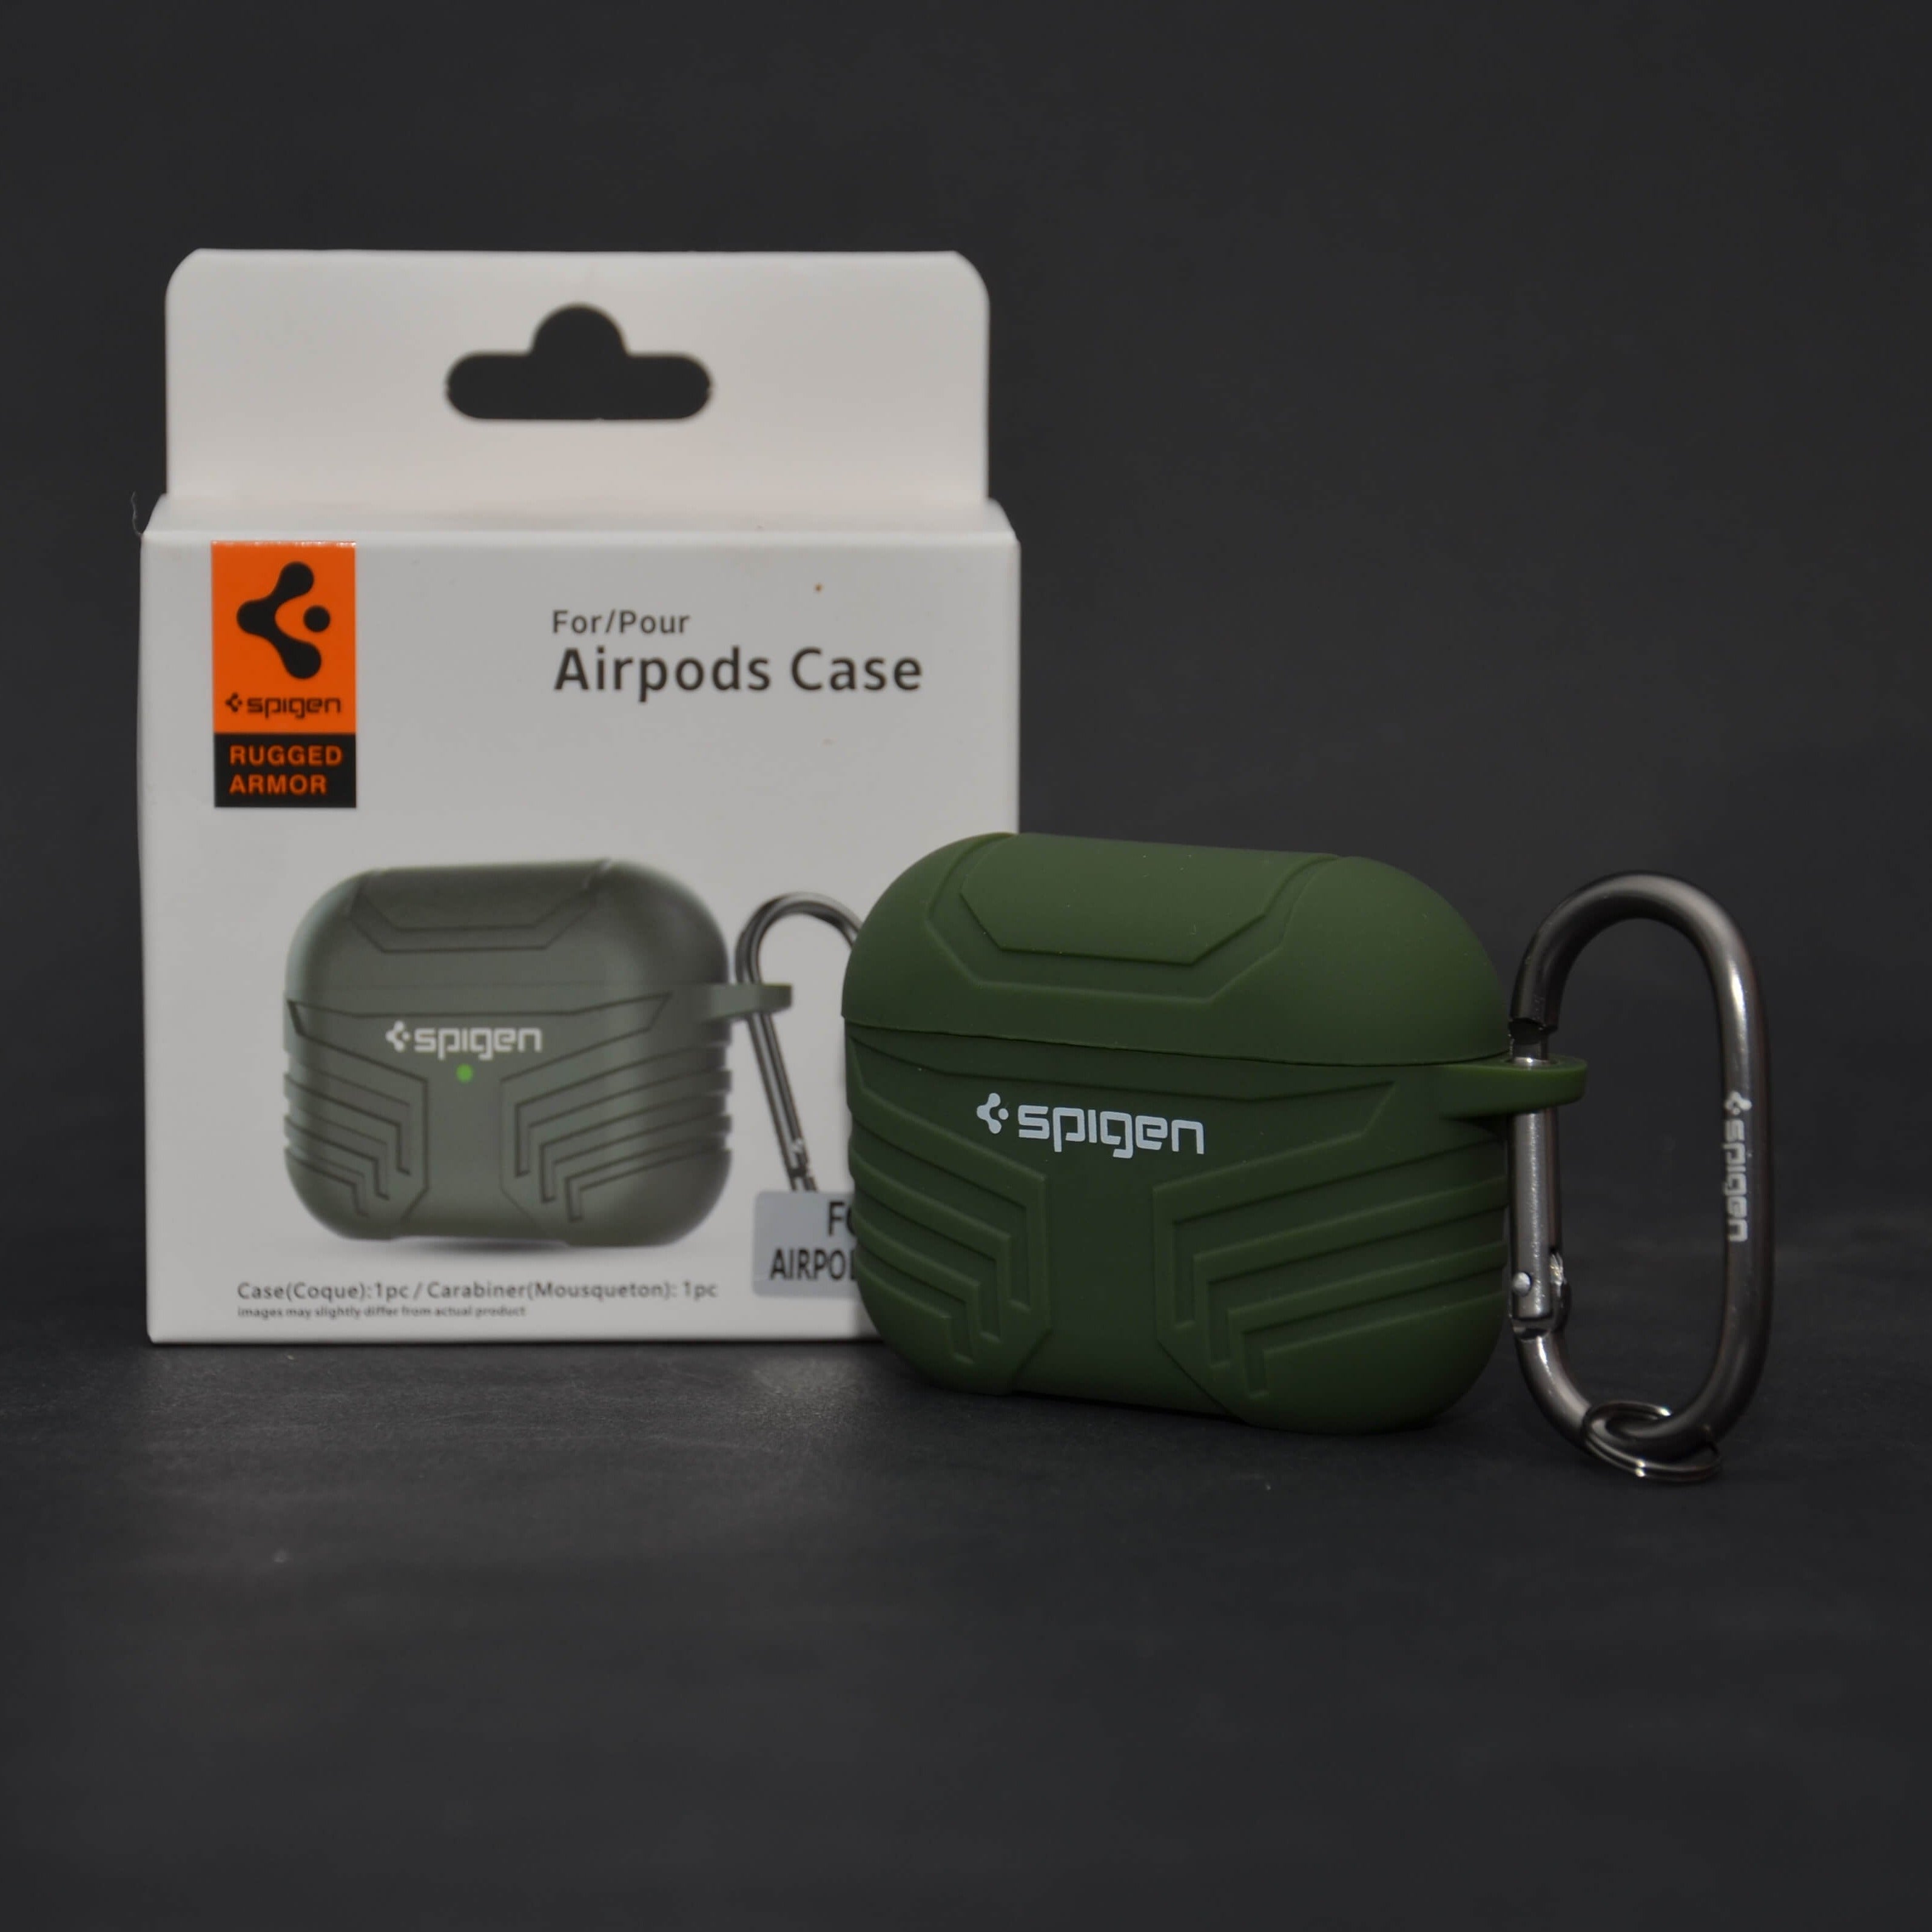 For Airpods Pro 2 Spigen Ecosystem Rugged Armor Case